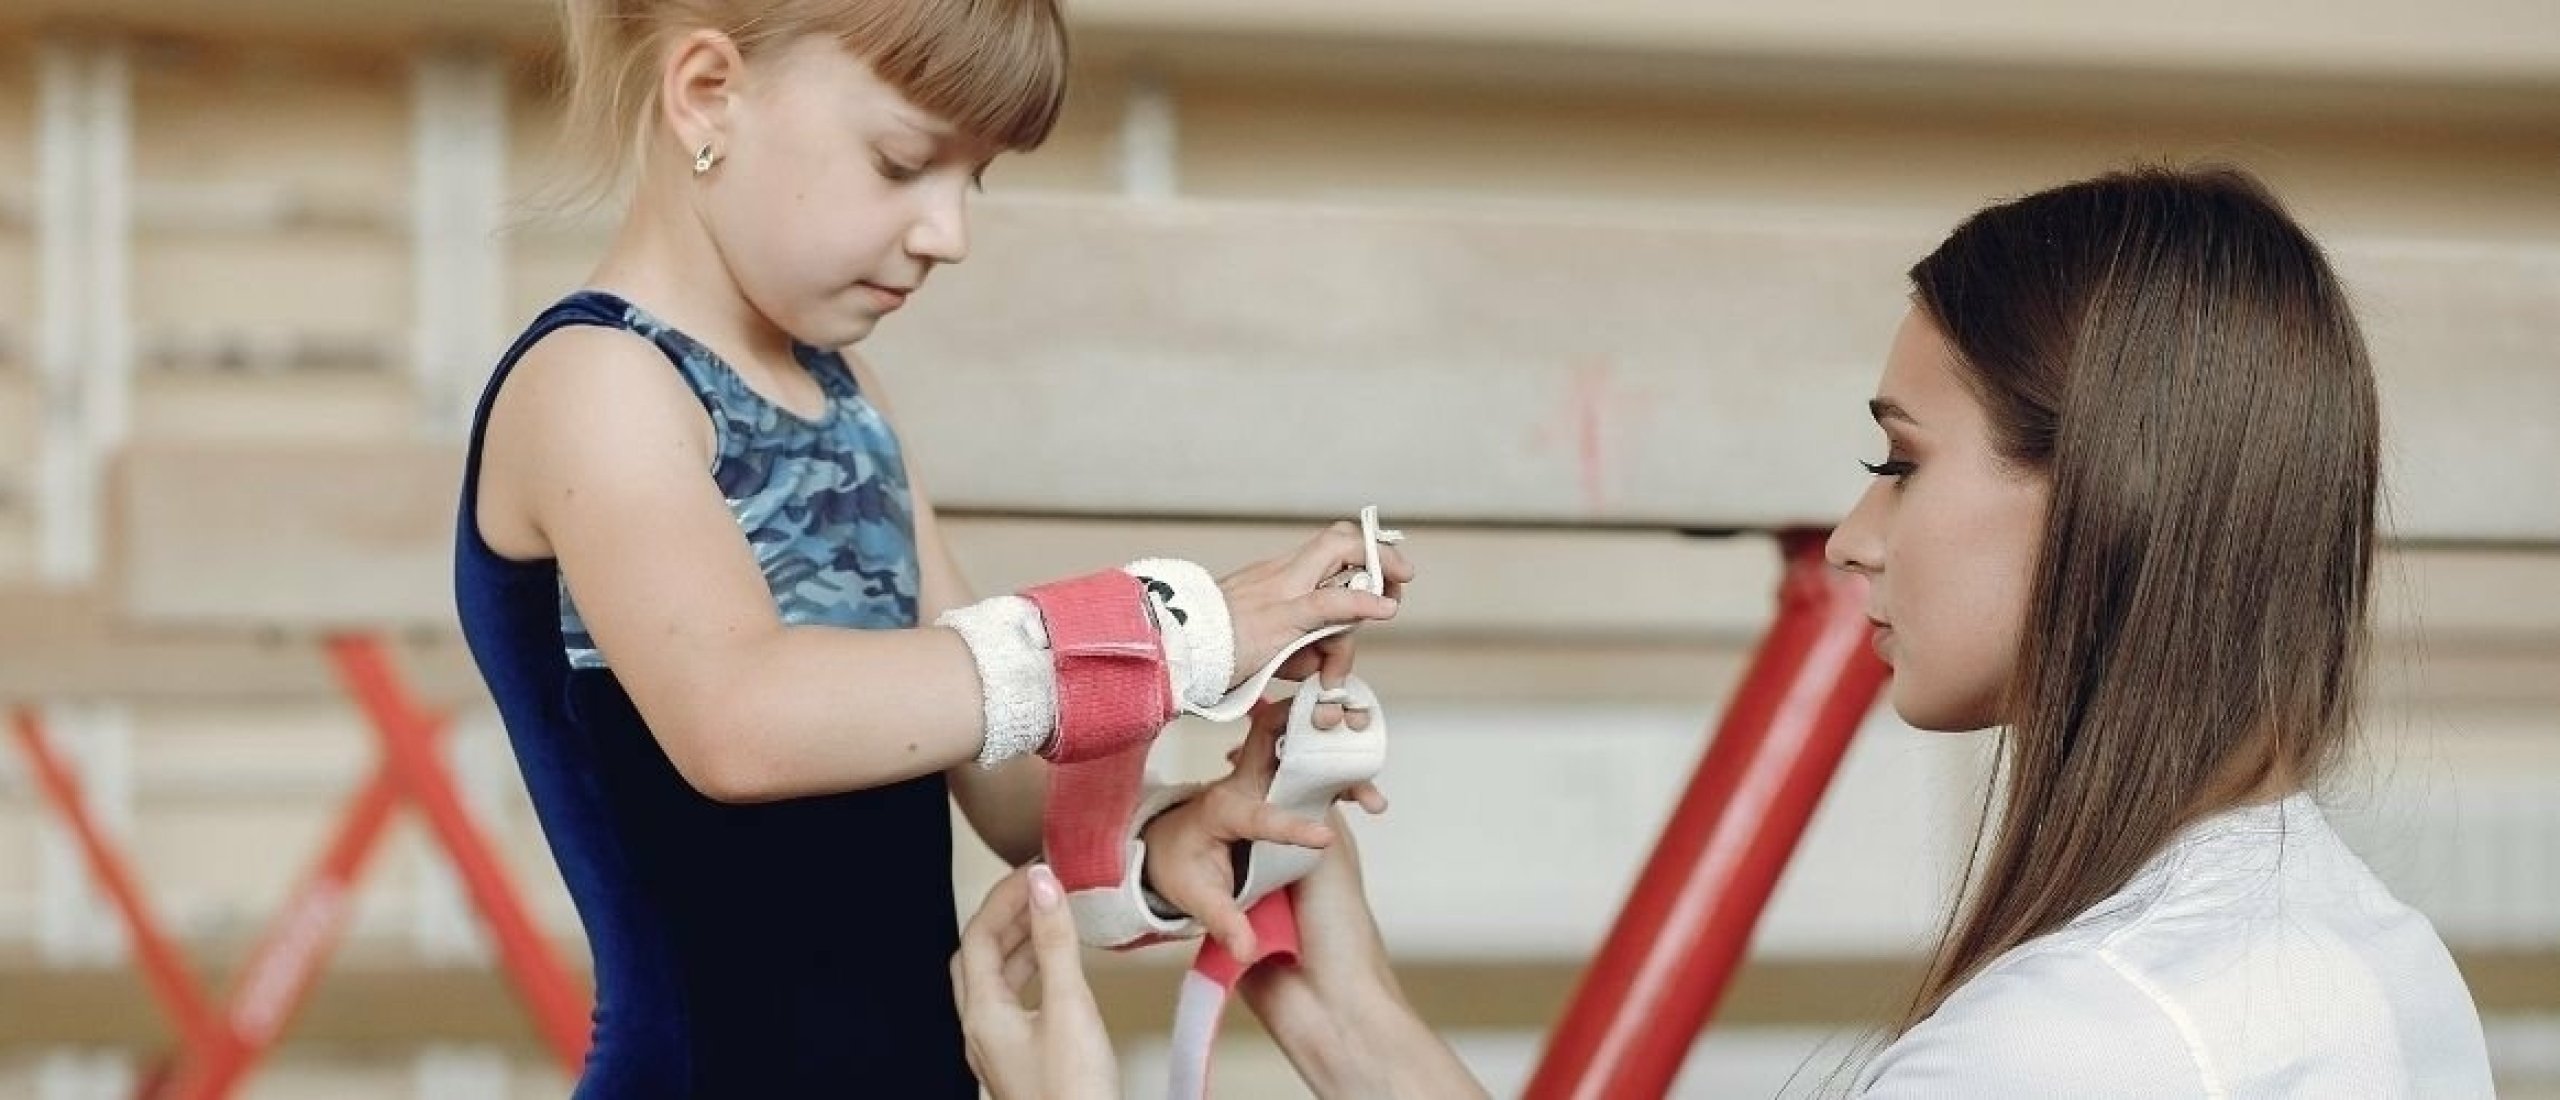 How do you manage assistants during gymnastics training?